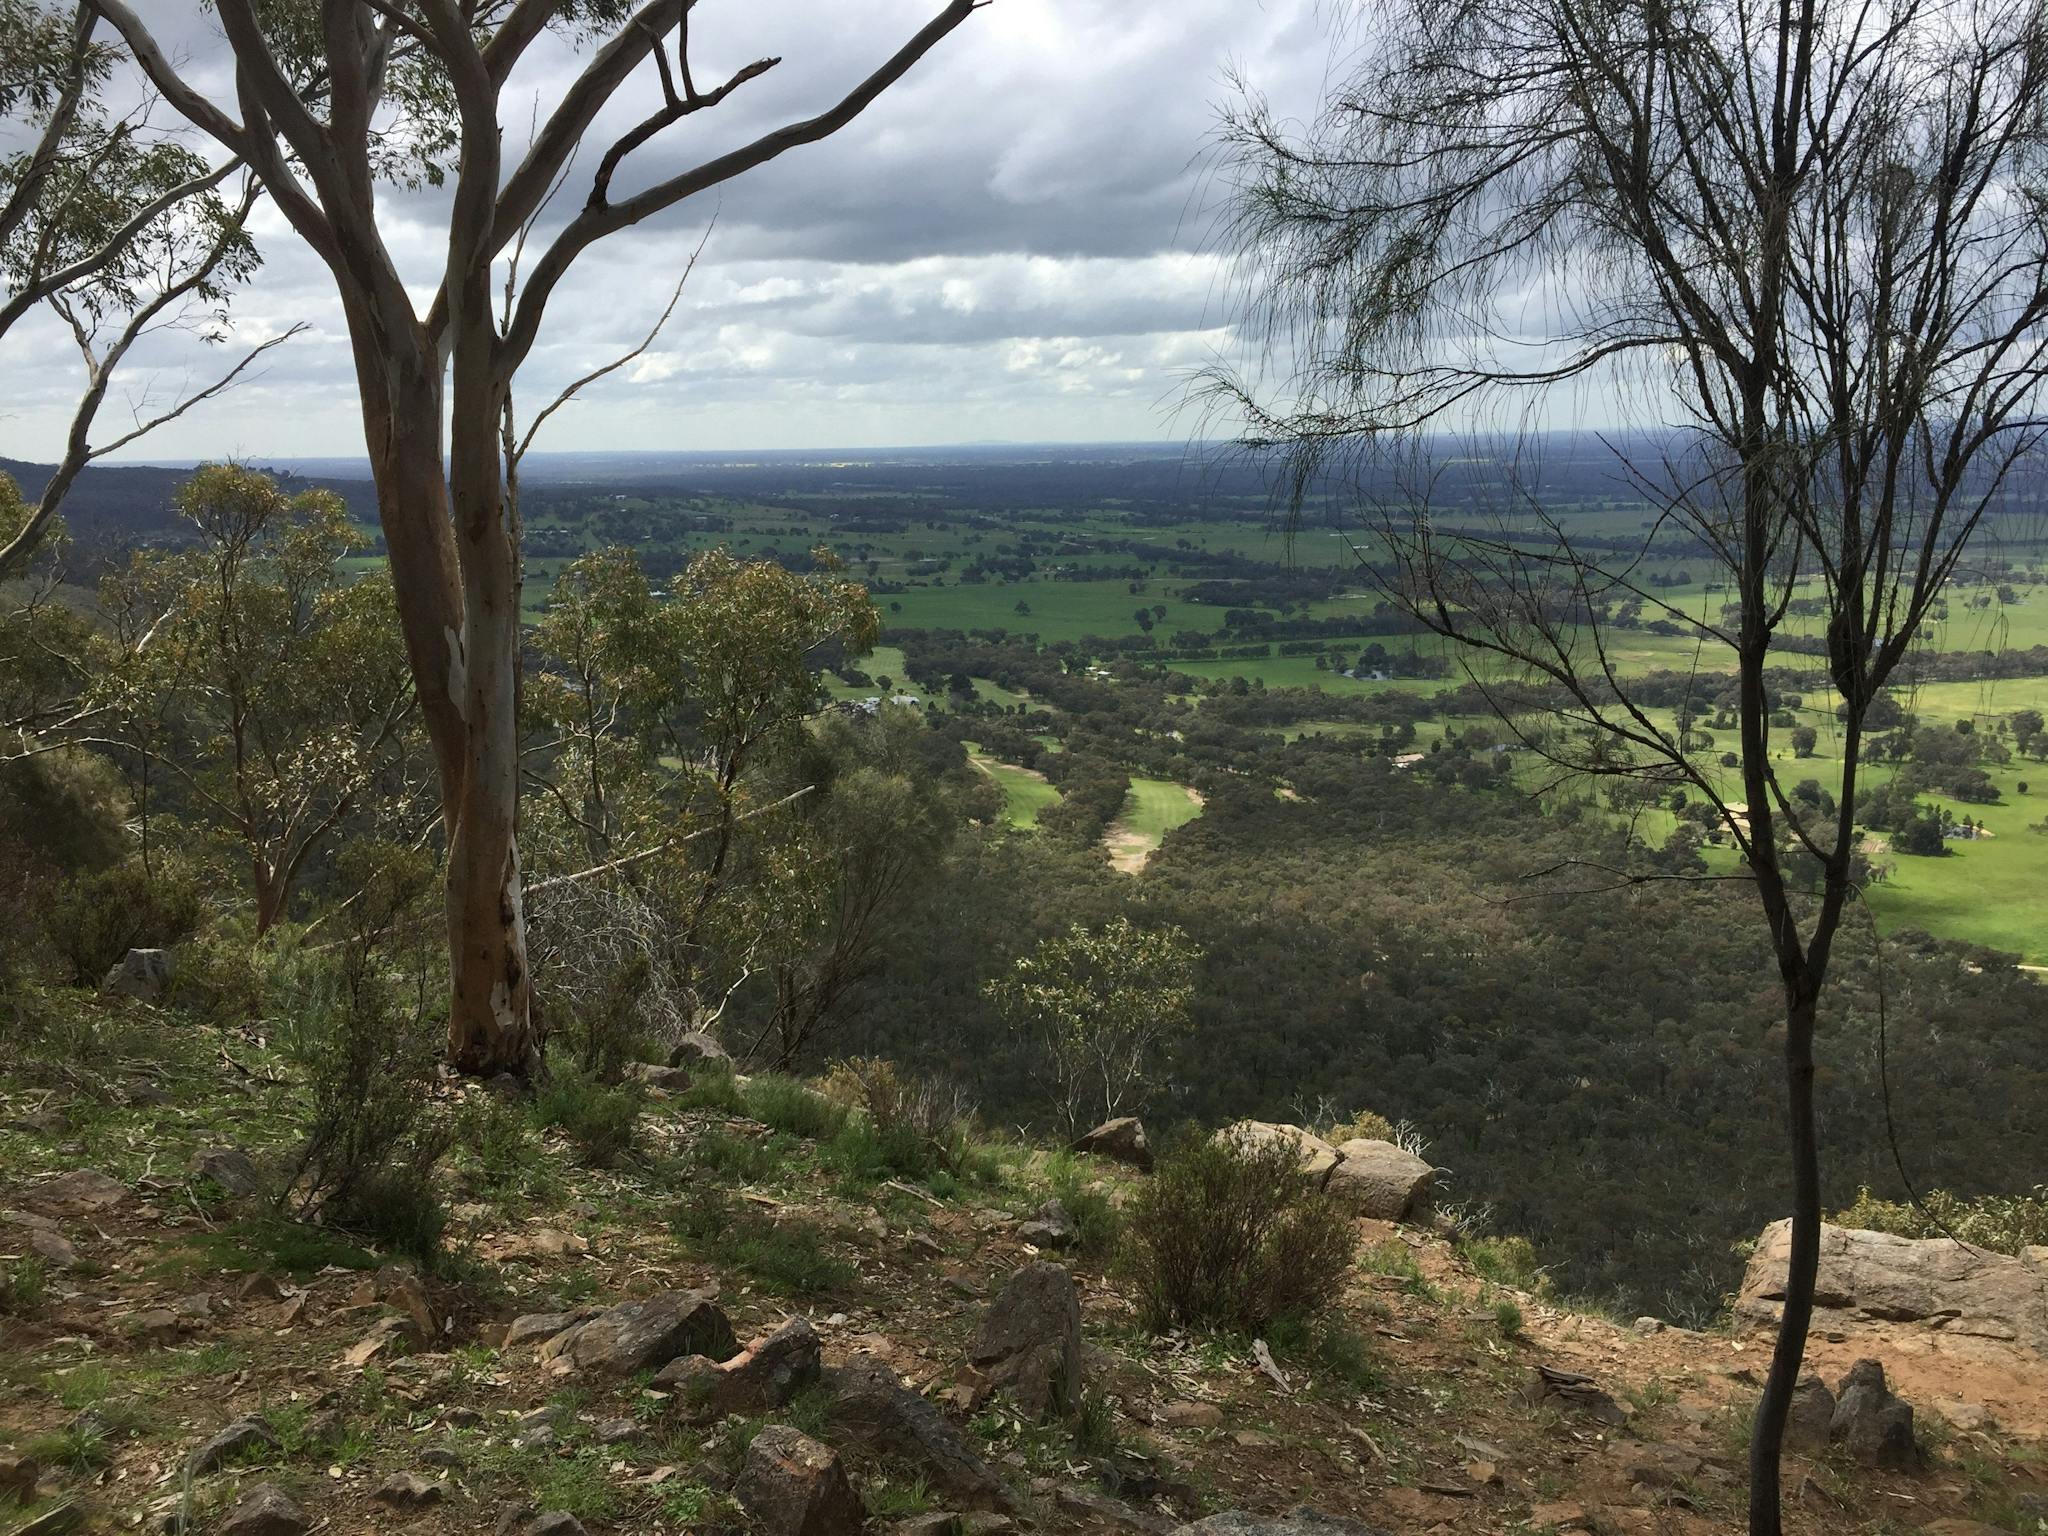 Lookout towards Ovens Valley, bush, trees, rocks, golf course, farm countryside, distant hills